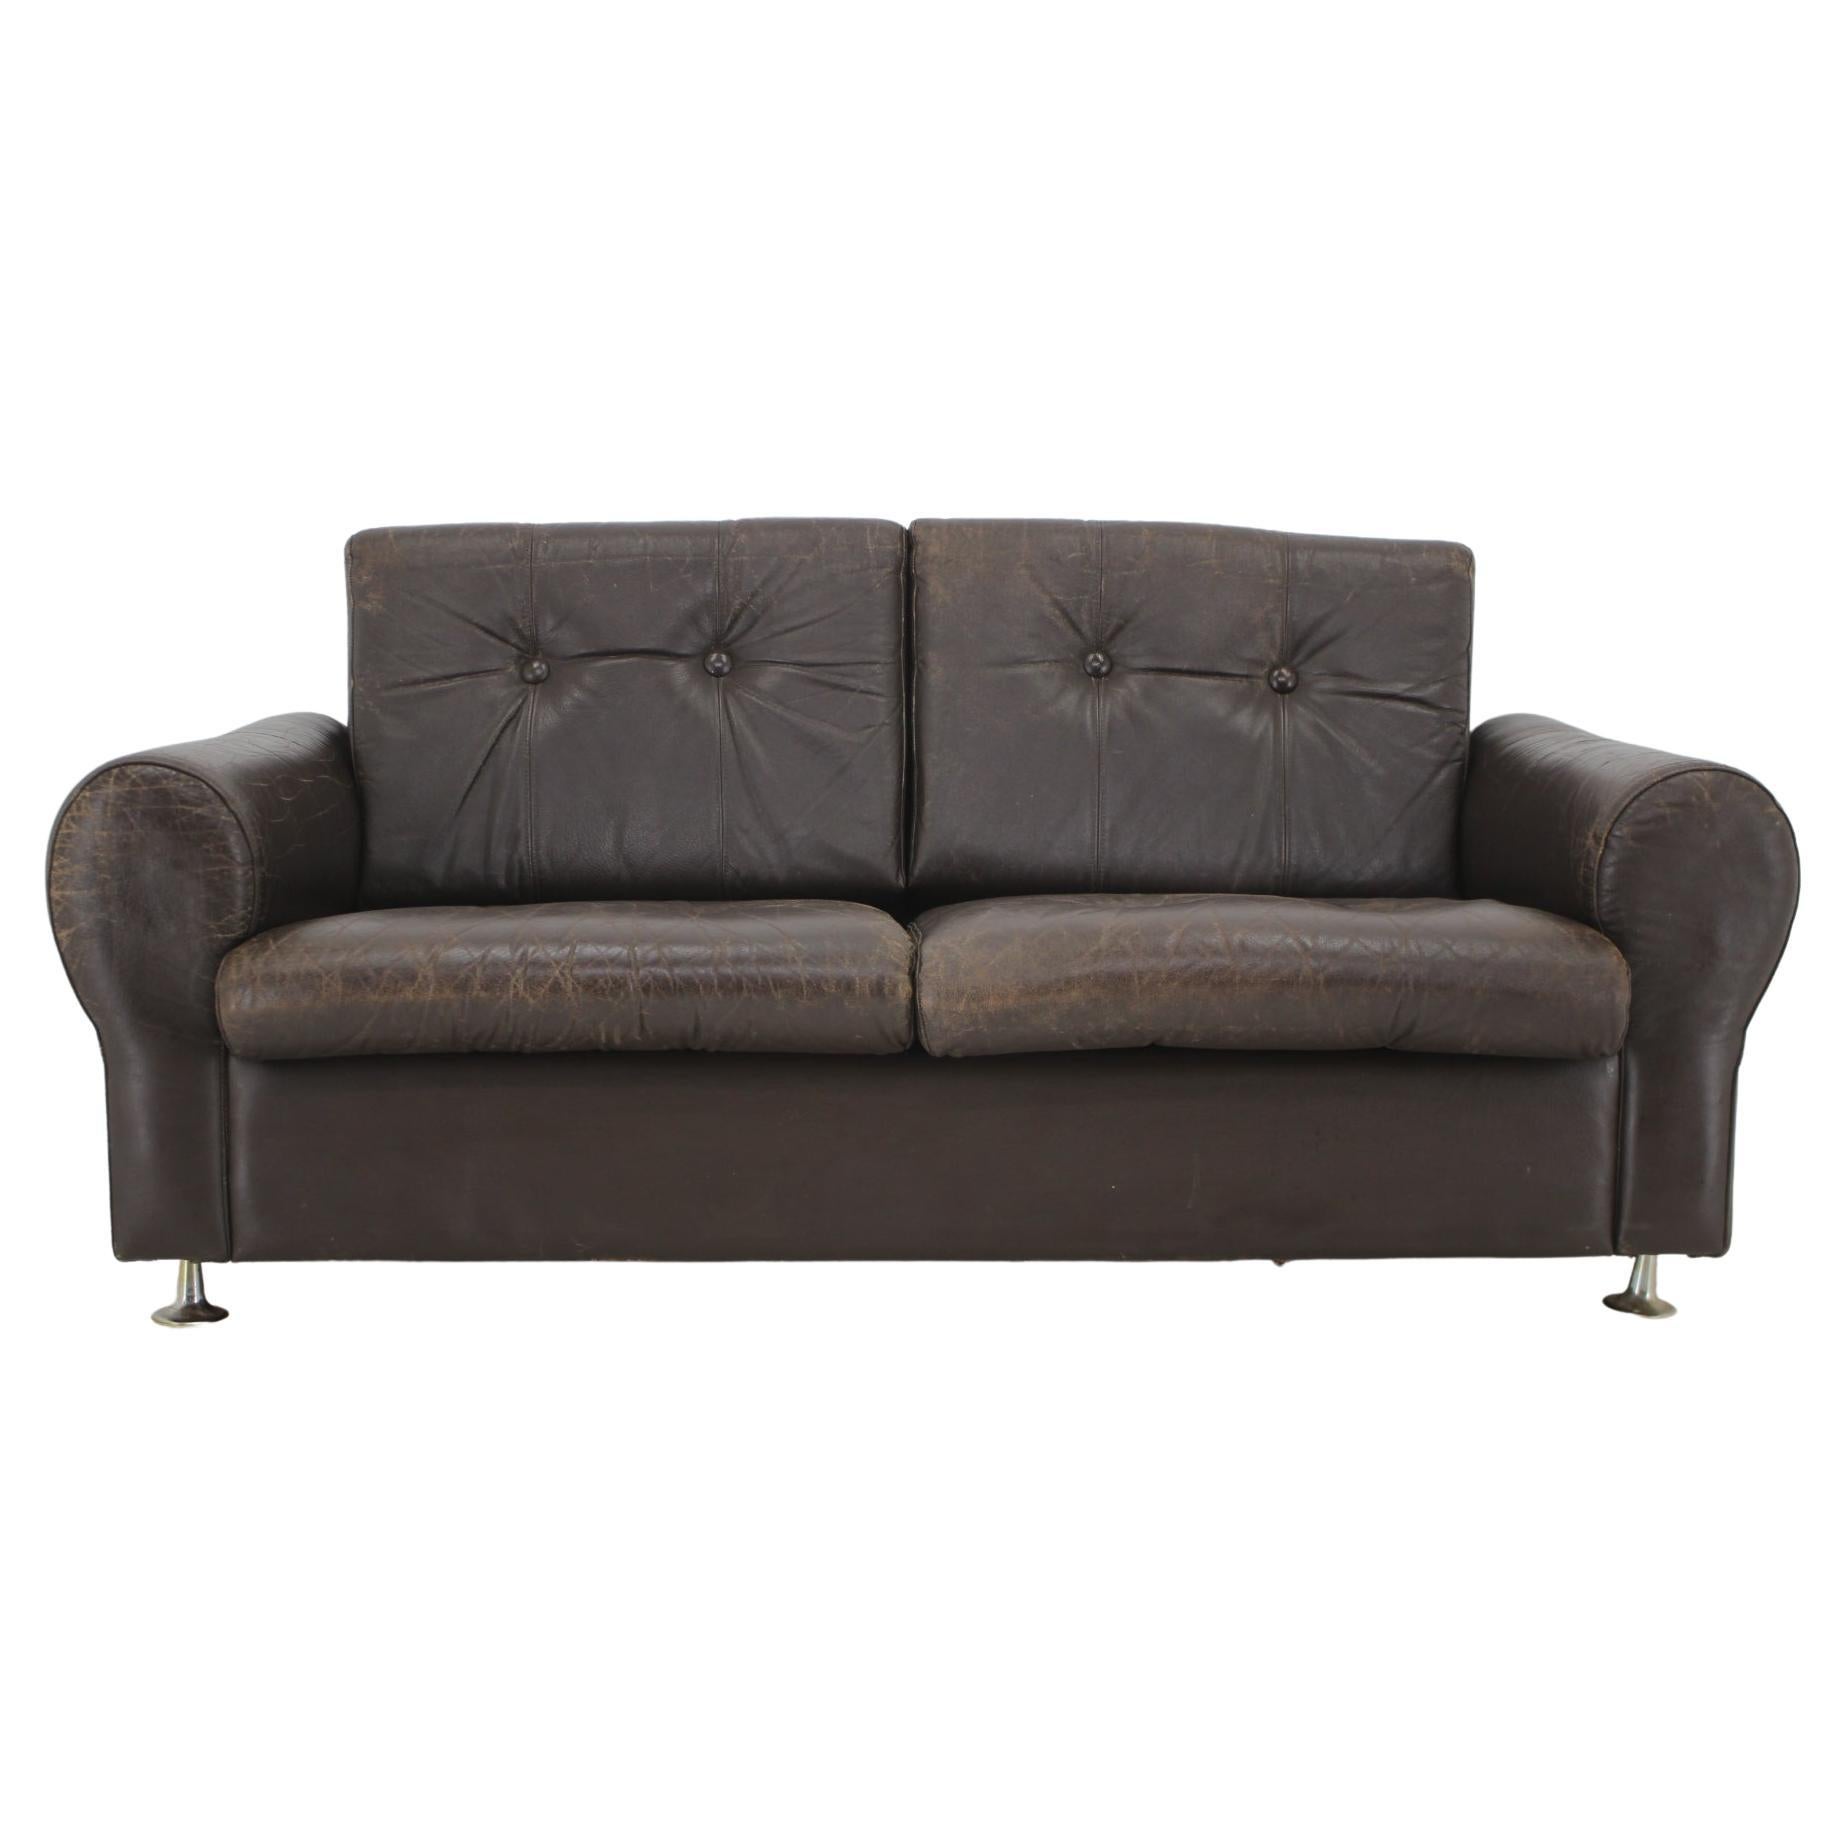 1970s Danish Brown Leather 2 Seater Sofa For Sale